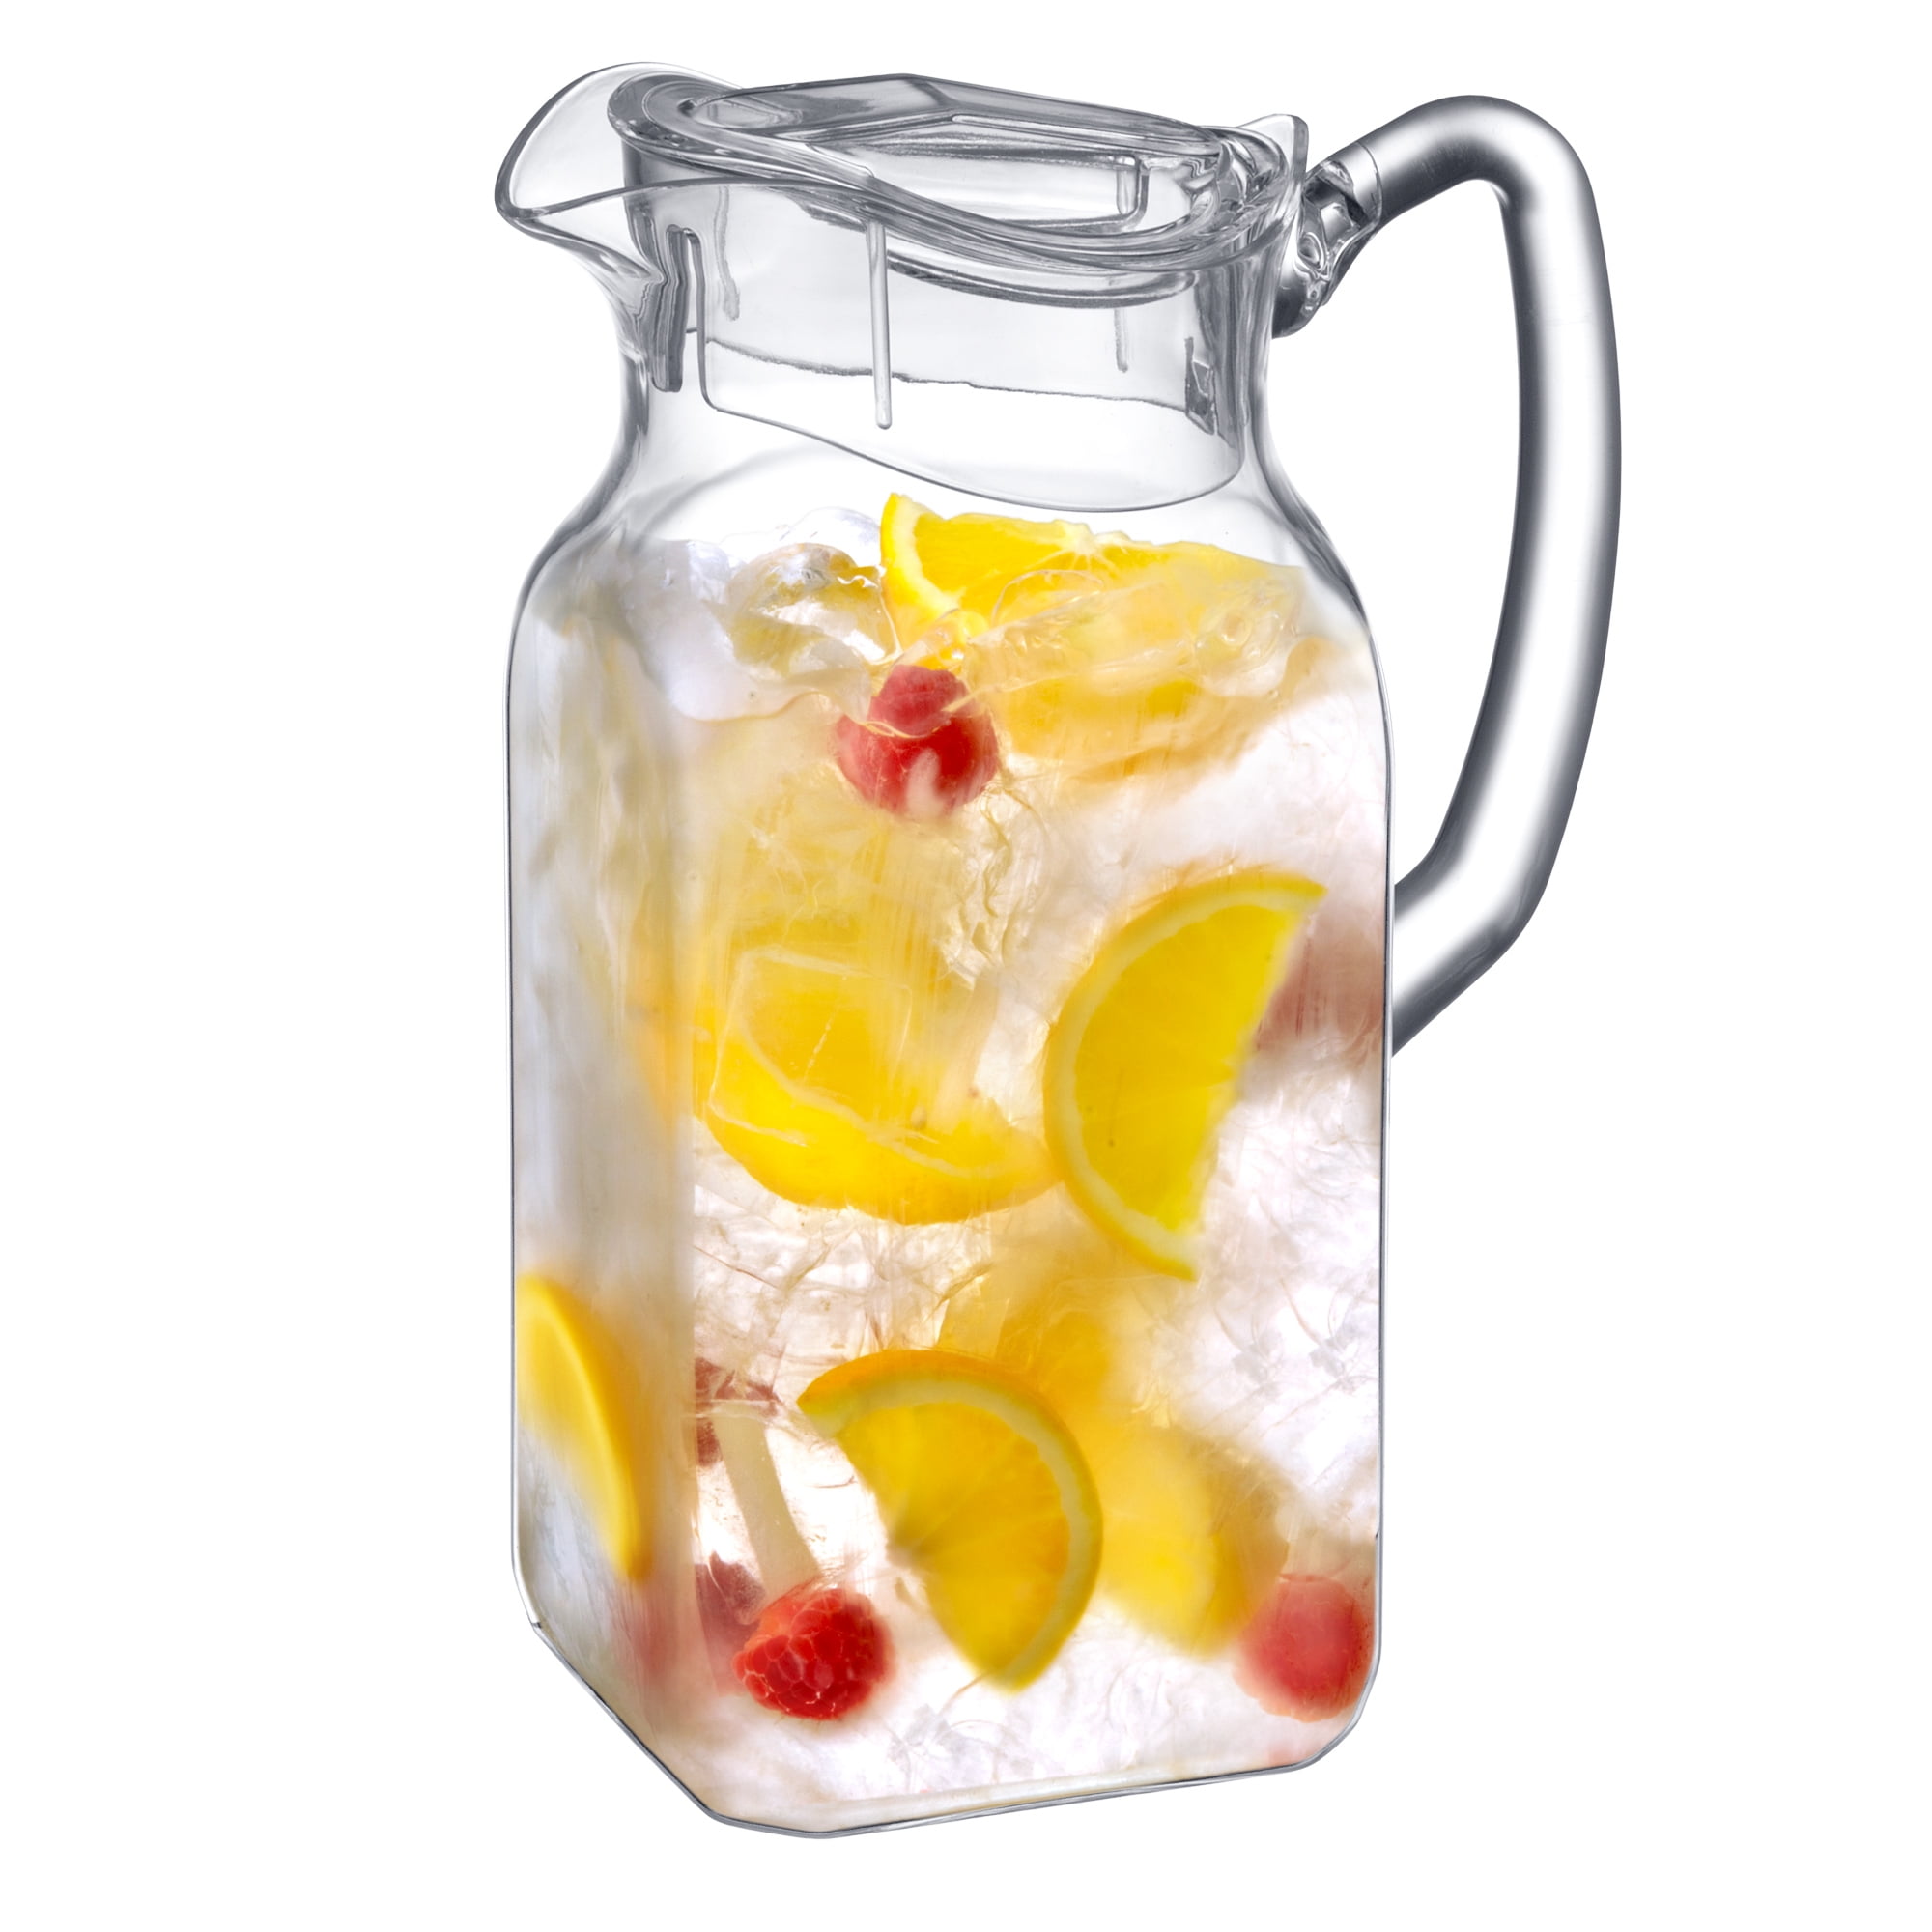  NETANY 50 Oz Water Carafe with Flip Top Lid, Clear Plastic  Pitcher Jug, 4 Pack Juice Containers, BPA Free - for Water, Iced Tea,  Juice, Lemonade, Milk, Cold Brew, Mimosa Bar —